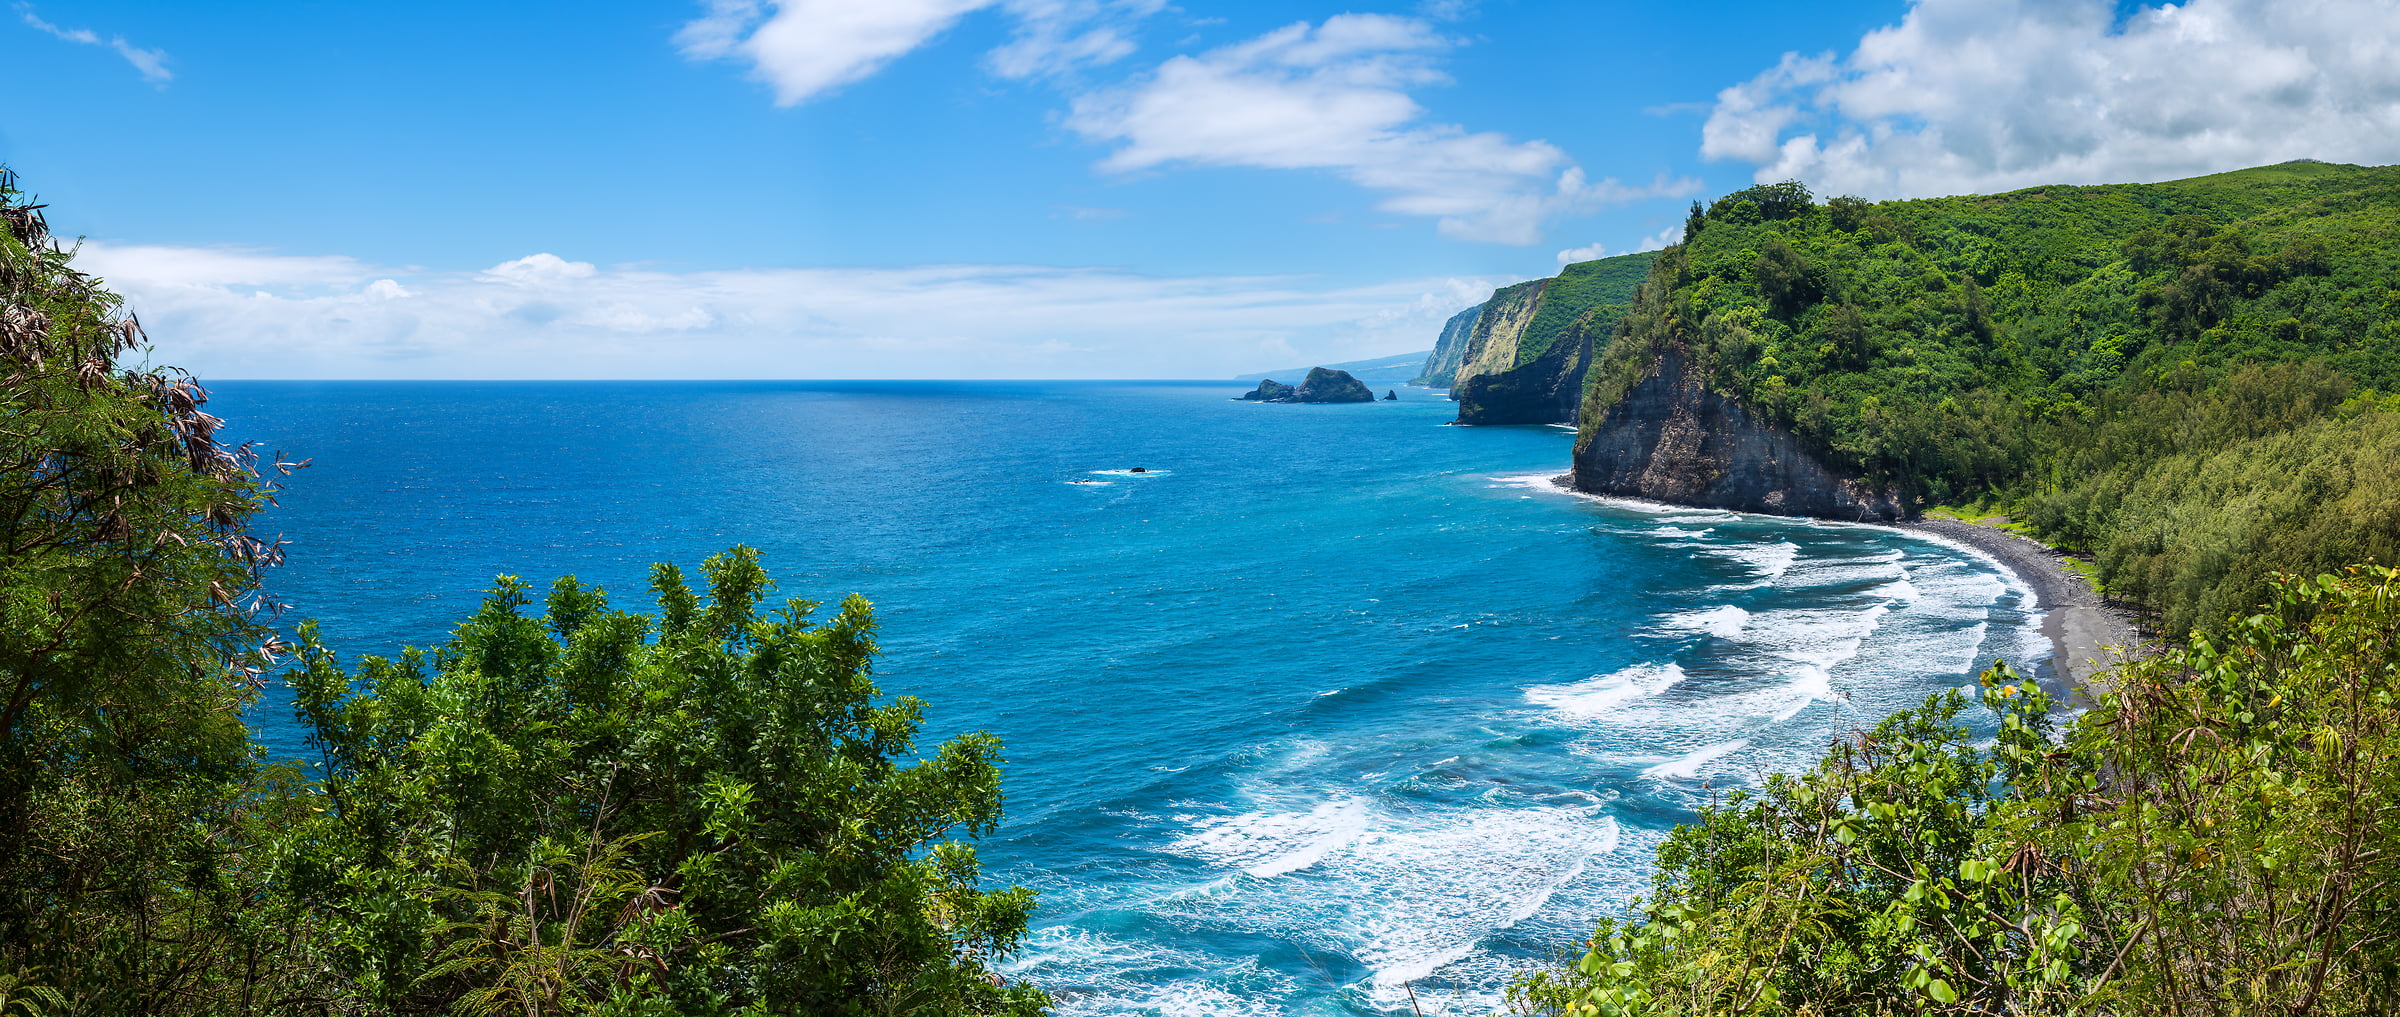 293 megapixels! A very high resolution, large-format VAST photo of the coastline in Hawaii with the ocean; landscape photograph created by Jim Tarpo in Pololu Valley, Hawaii